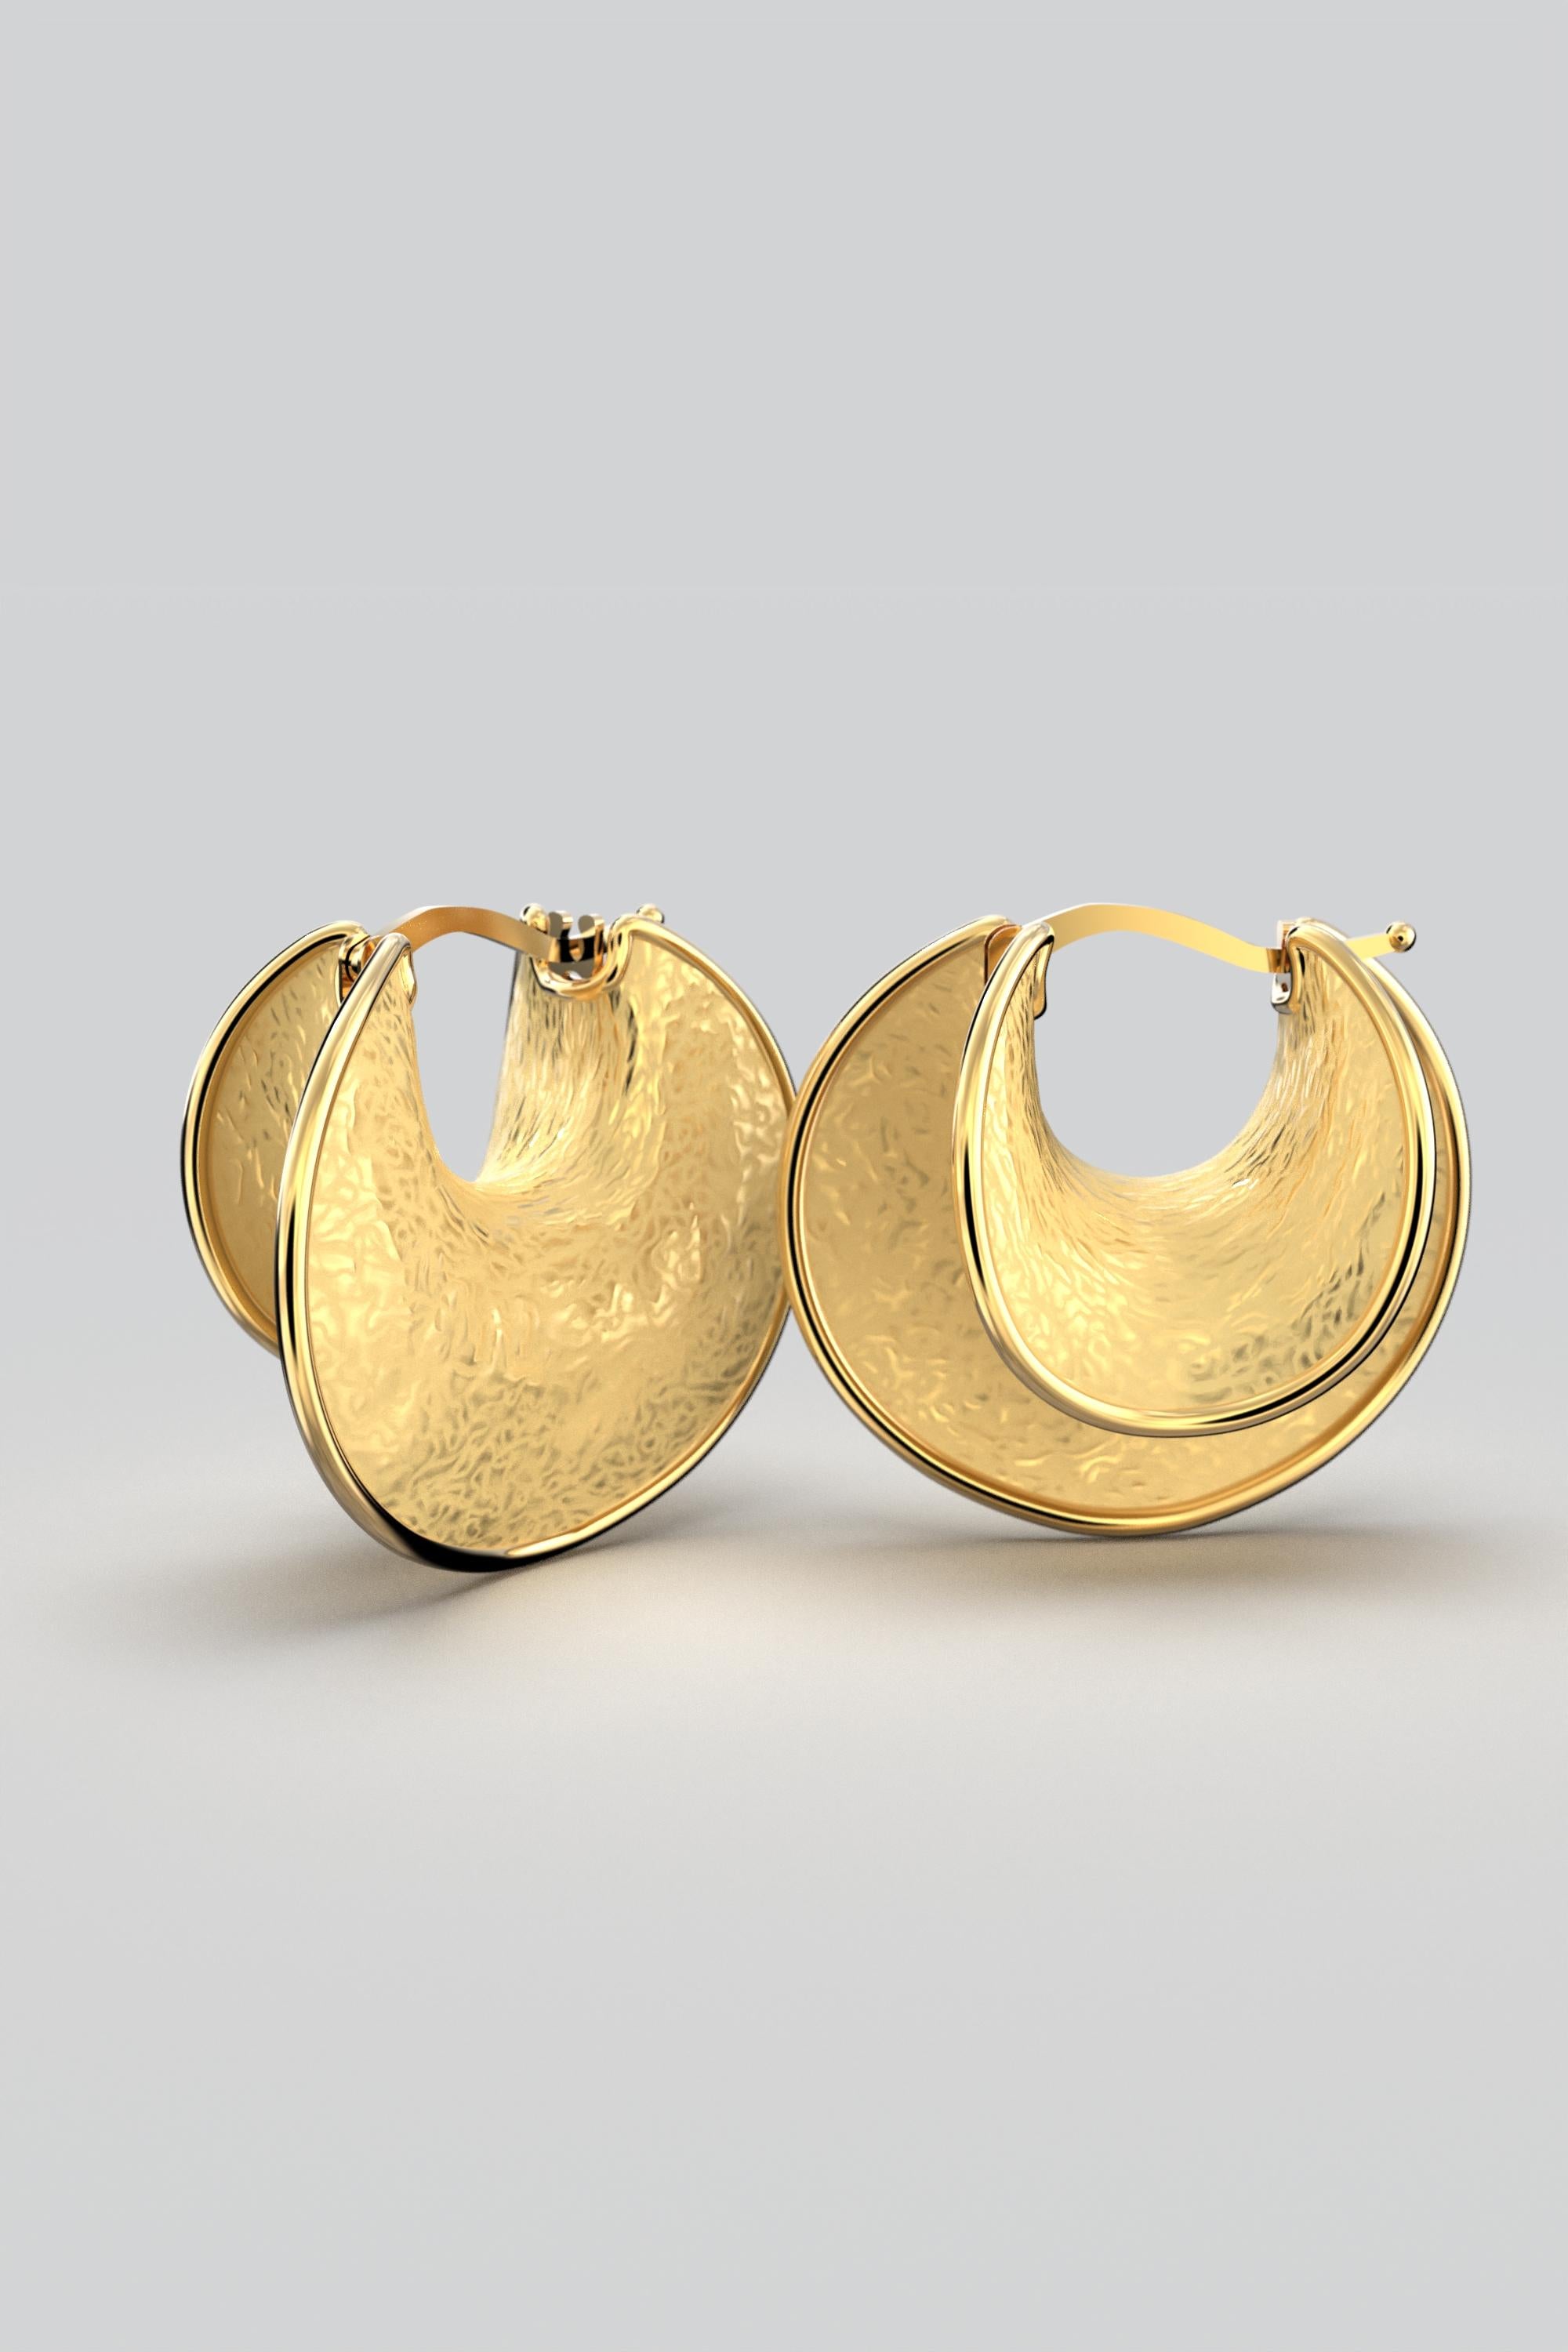 Italian 18k Gold Hoop Earrings Made in Italy by Oltremare Gioielli For Sale 4